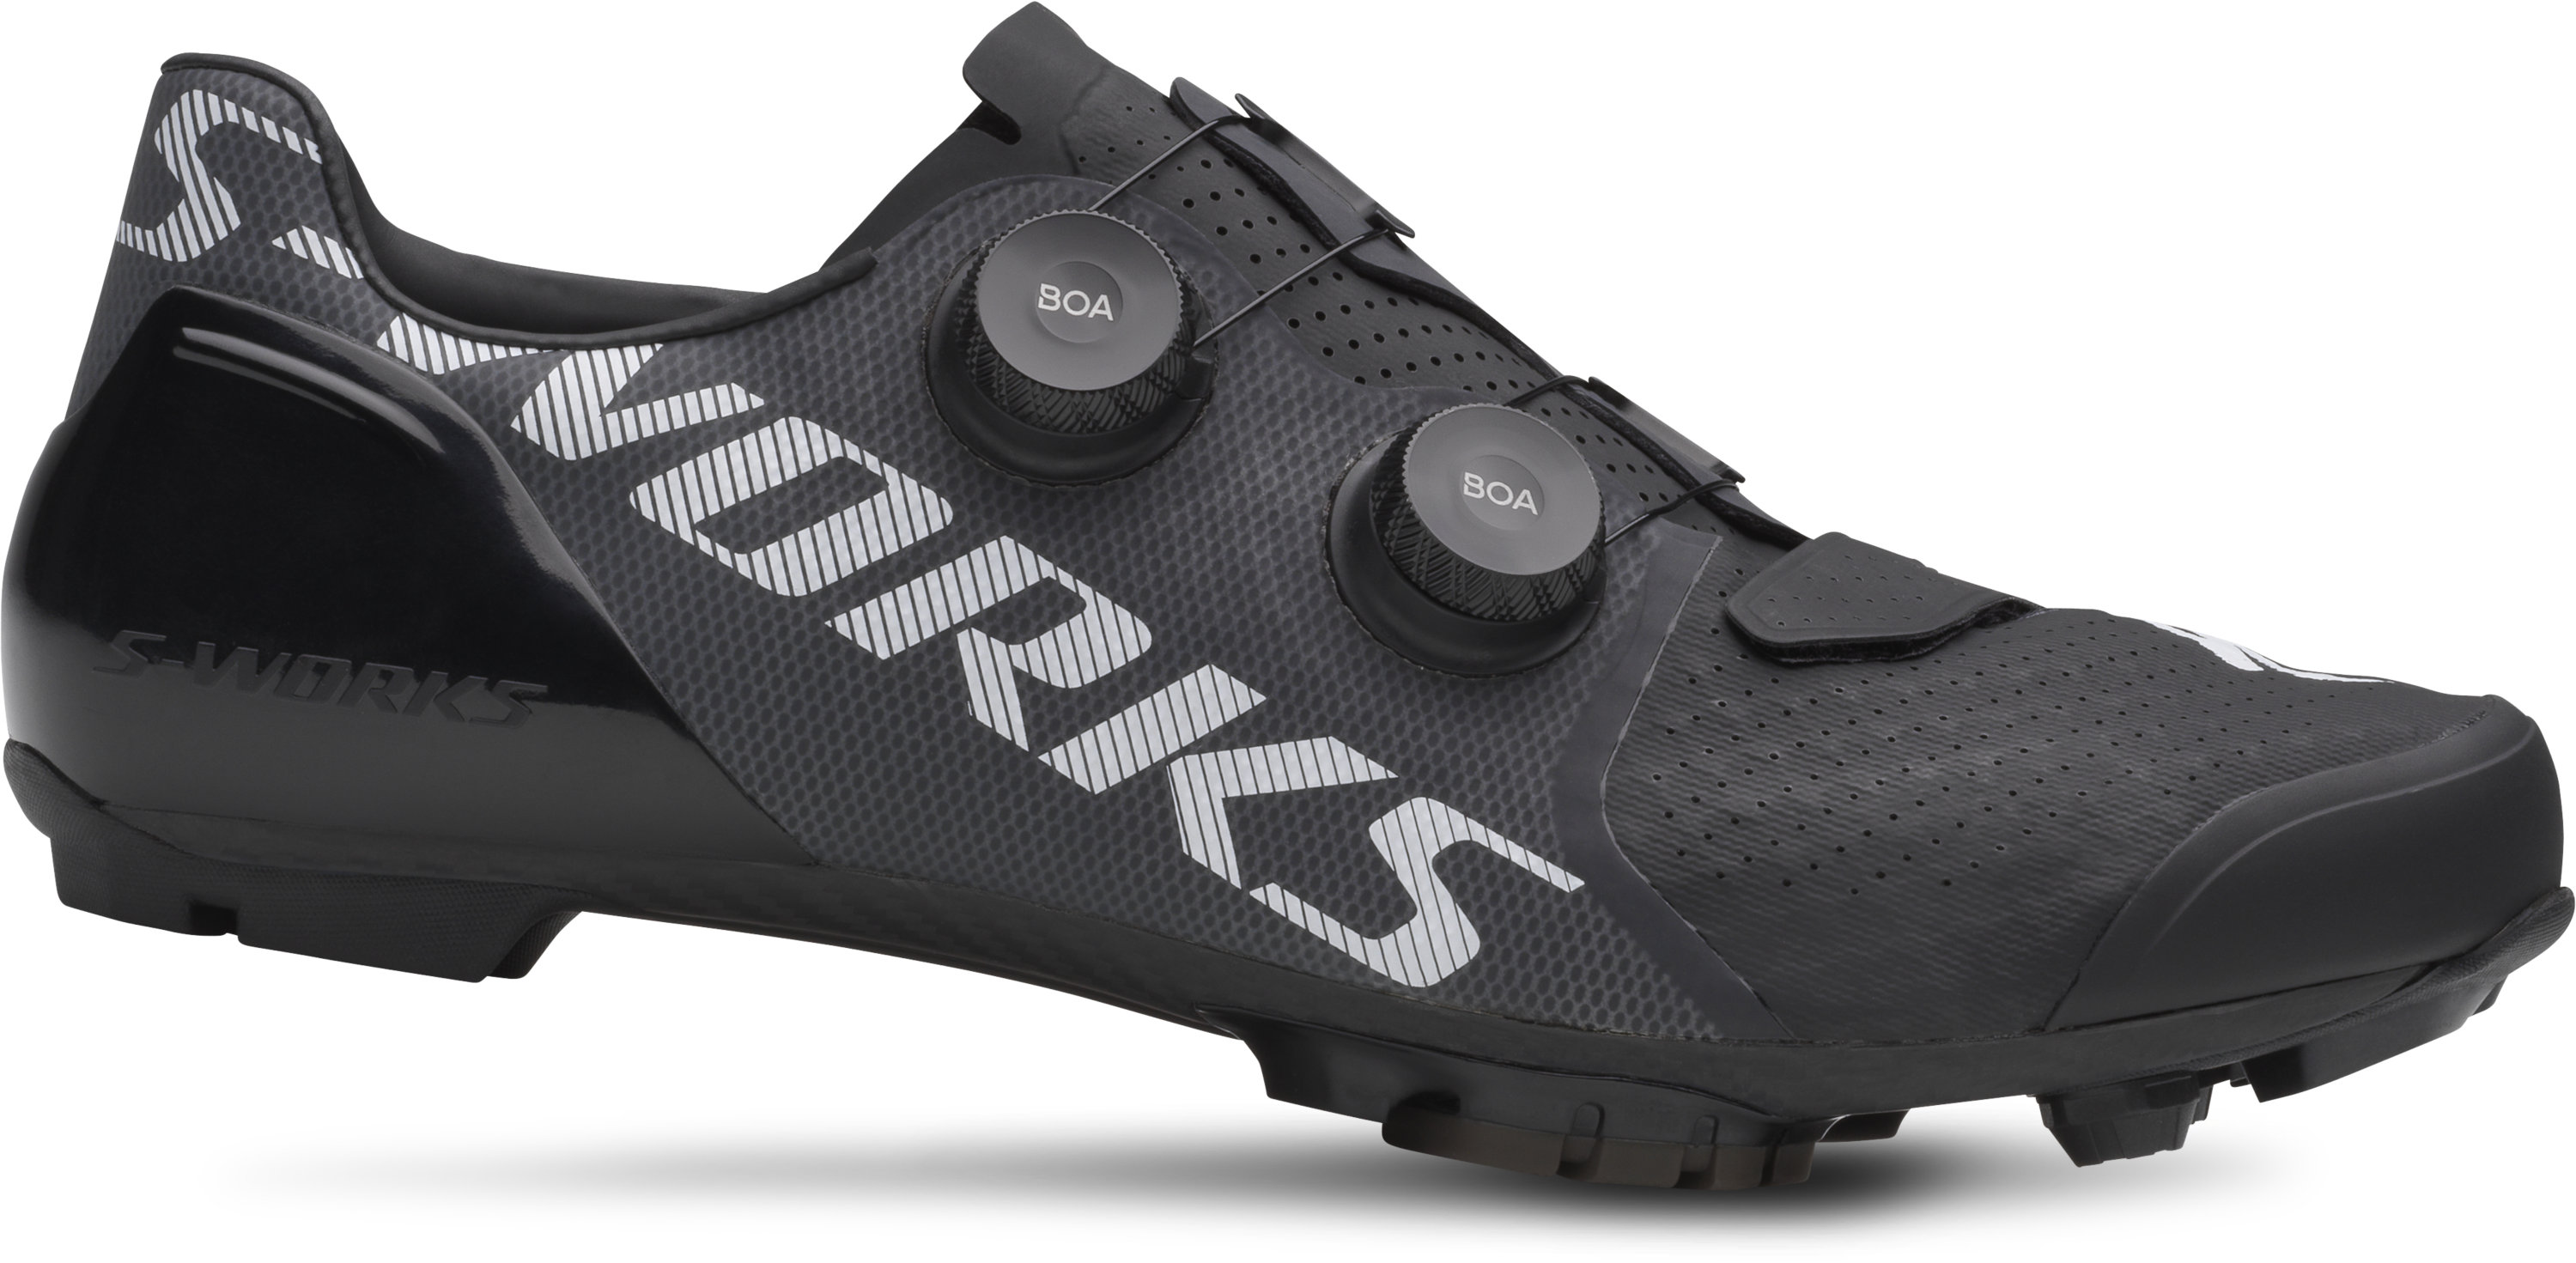 s works mtb shoes